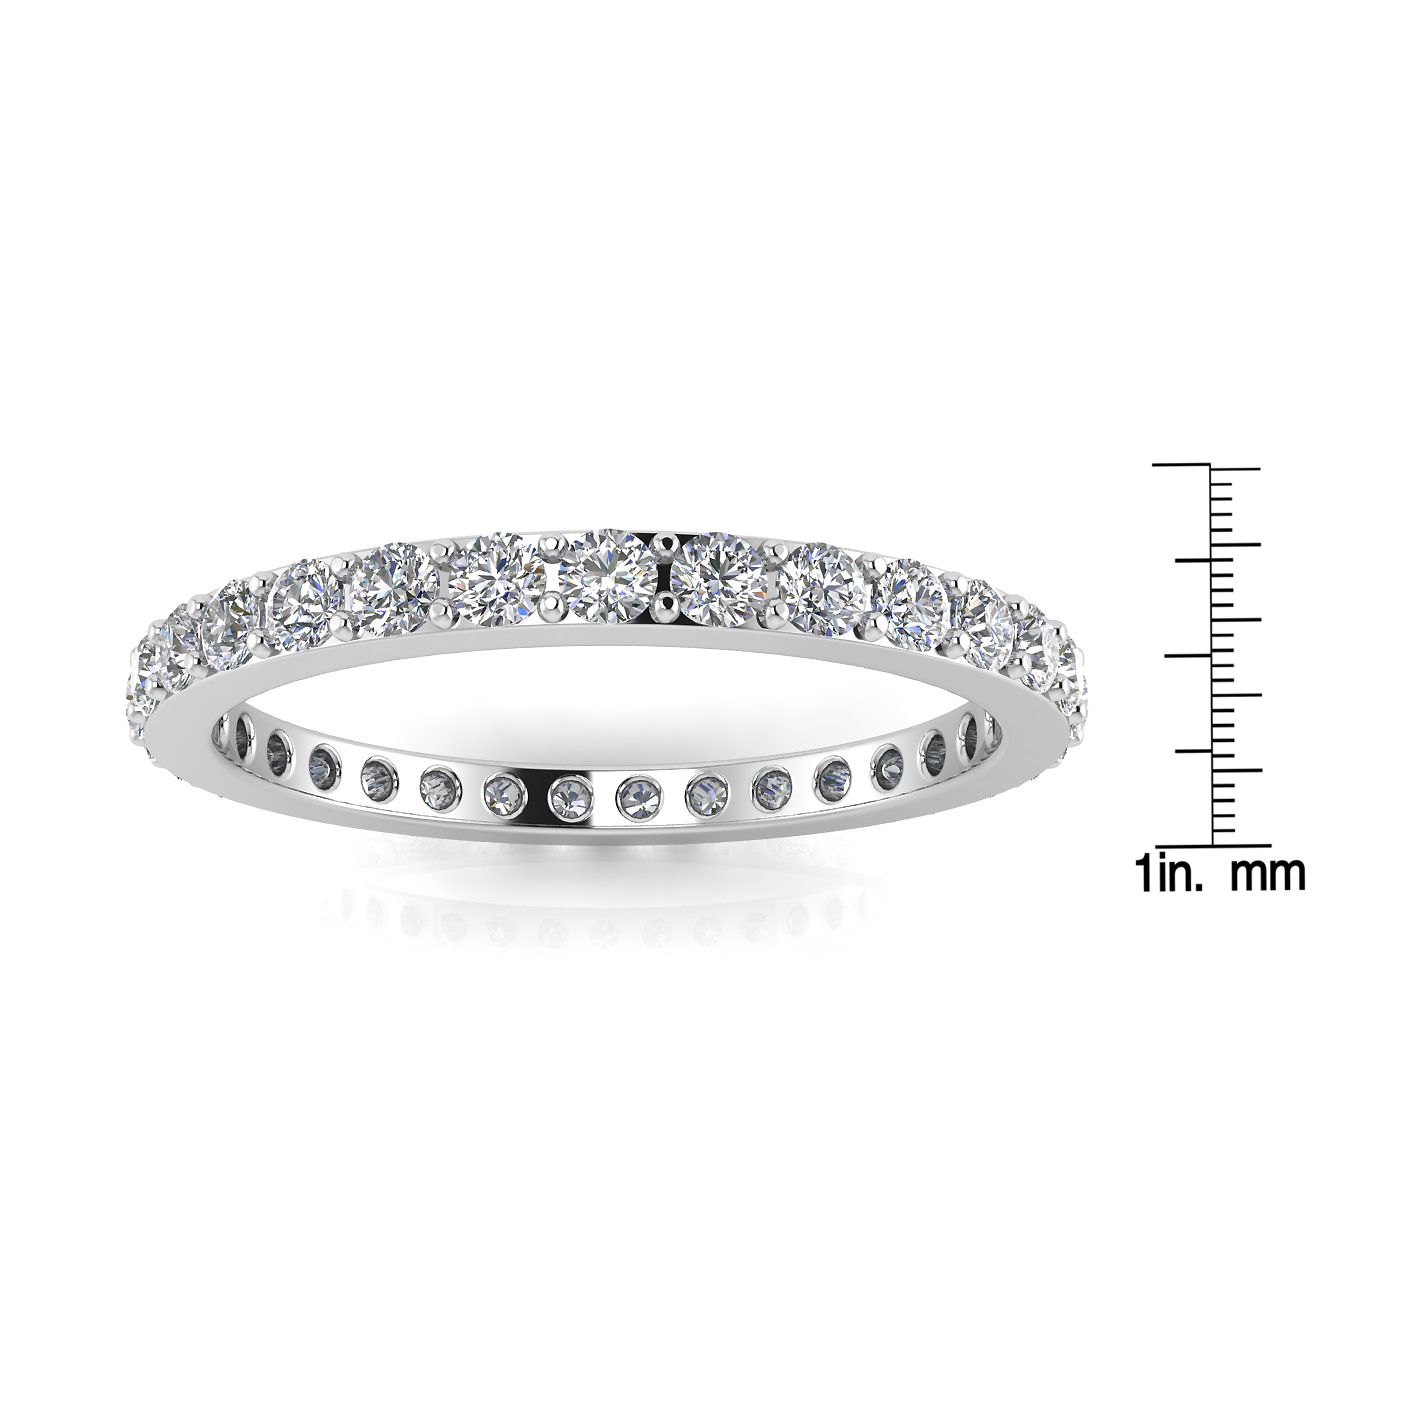 Round Brilliant Cut Diamond Pave Set Eternity Ring In 18k White Gold  (0.5ct. Tw.) Ring Size 8